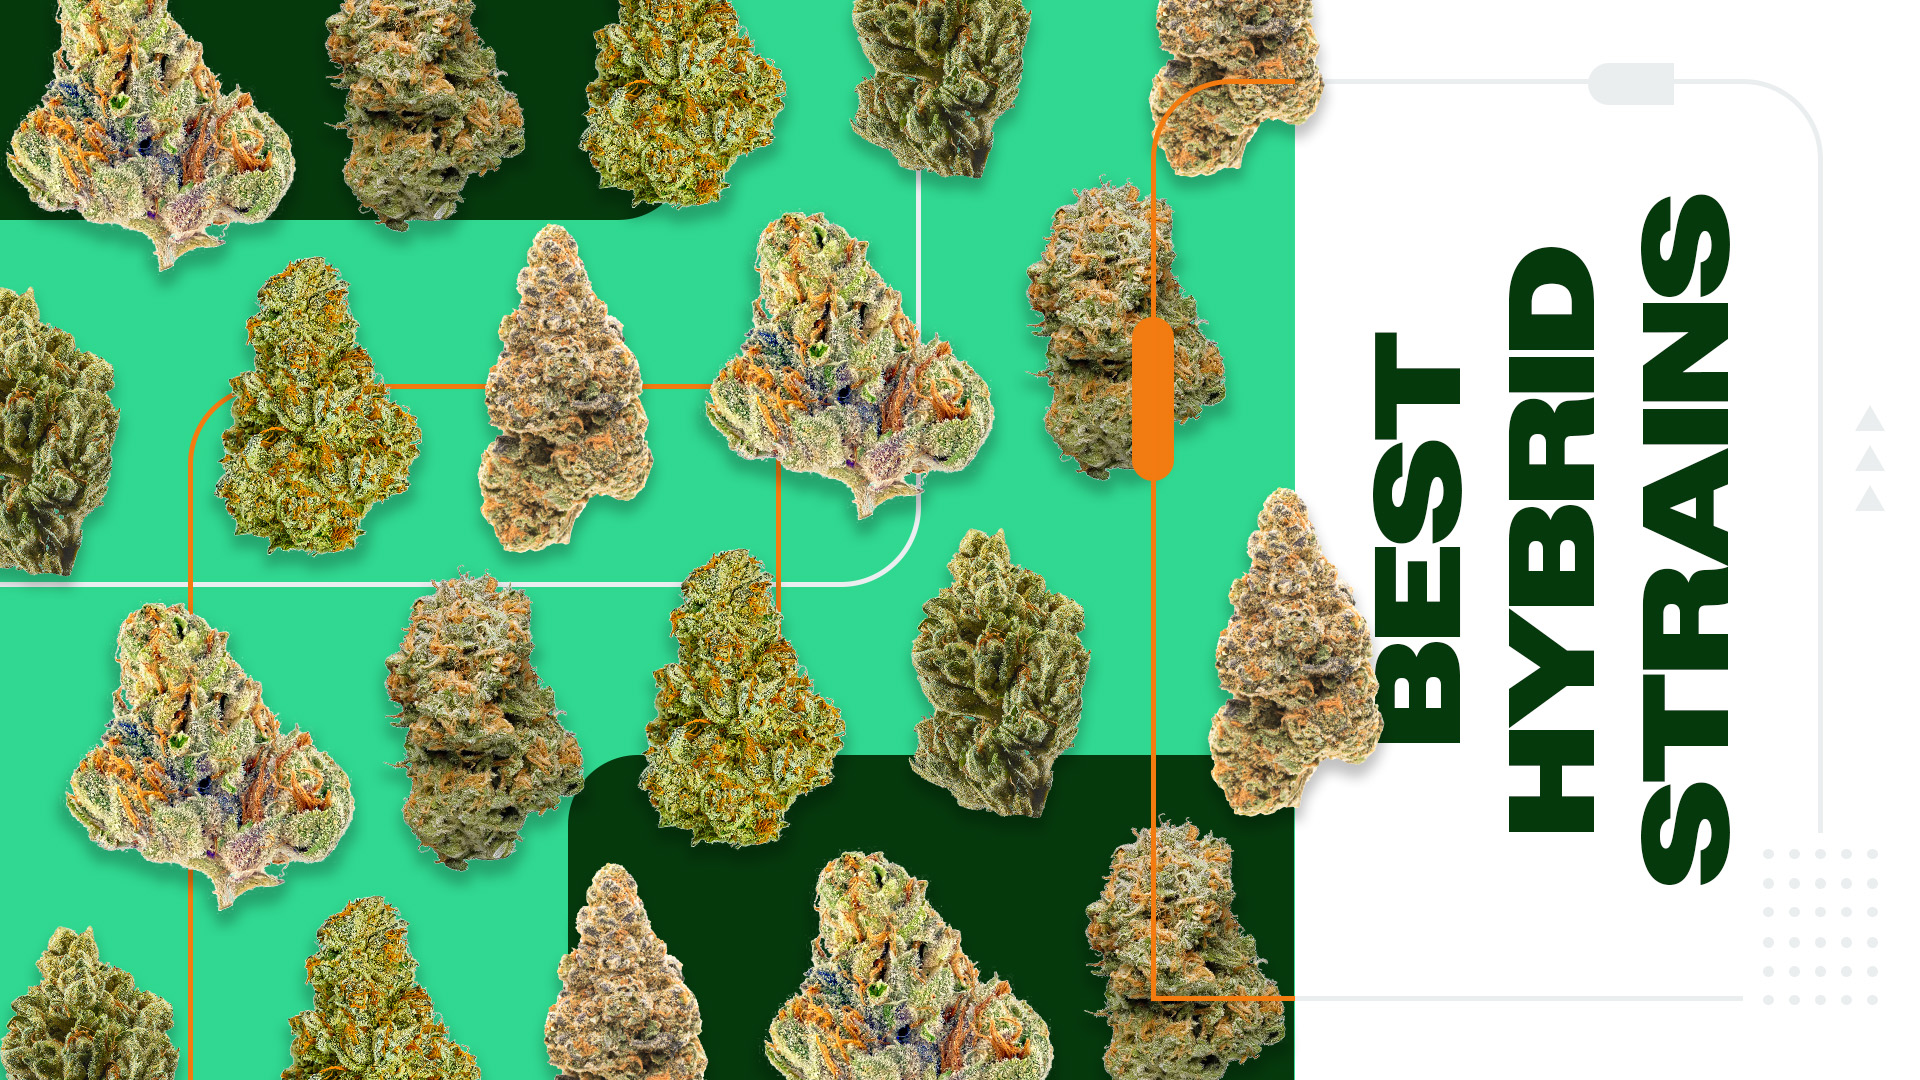 5 of The Best Hybrid Cannabis Strains For Balanced Effects